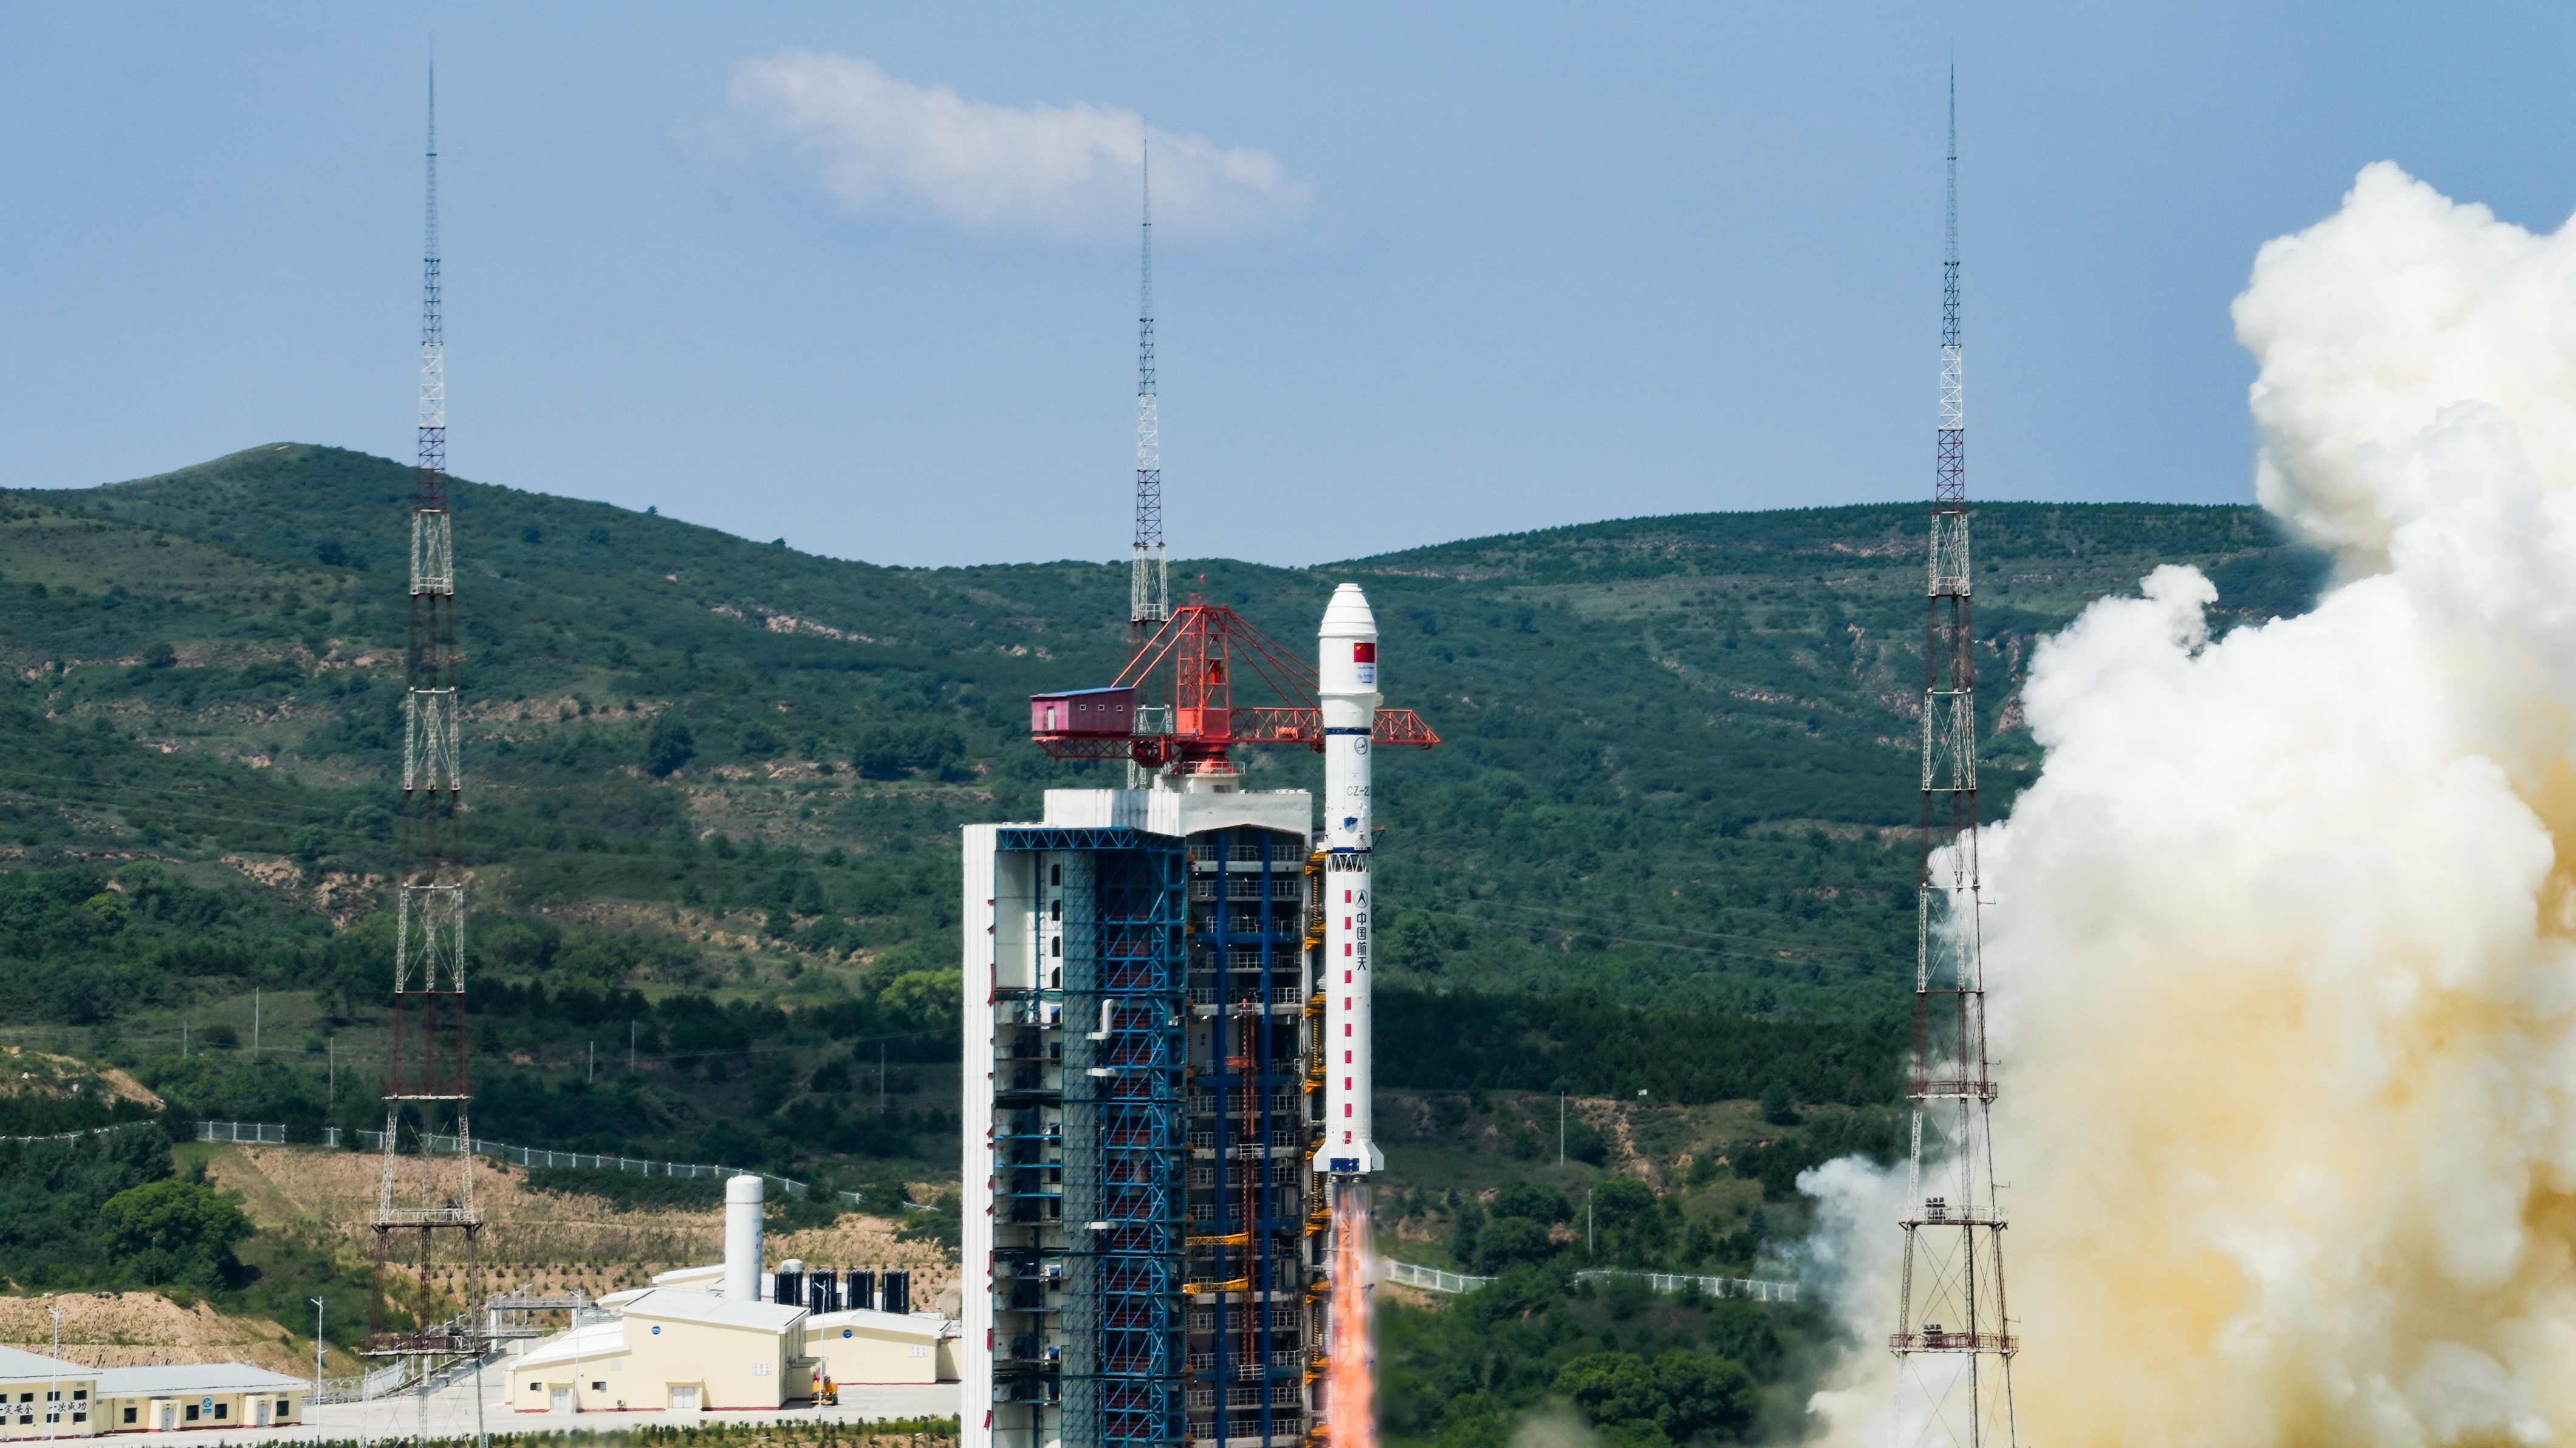 First Kenyan Satellite Launch Postponed for Fourth Time